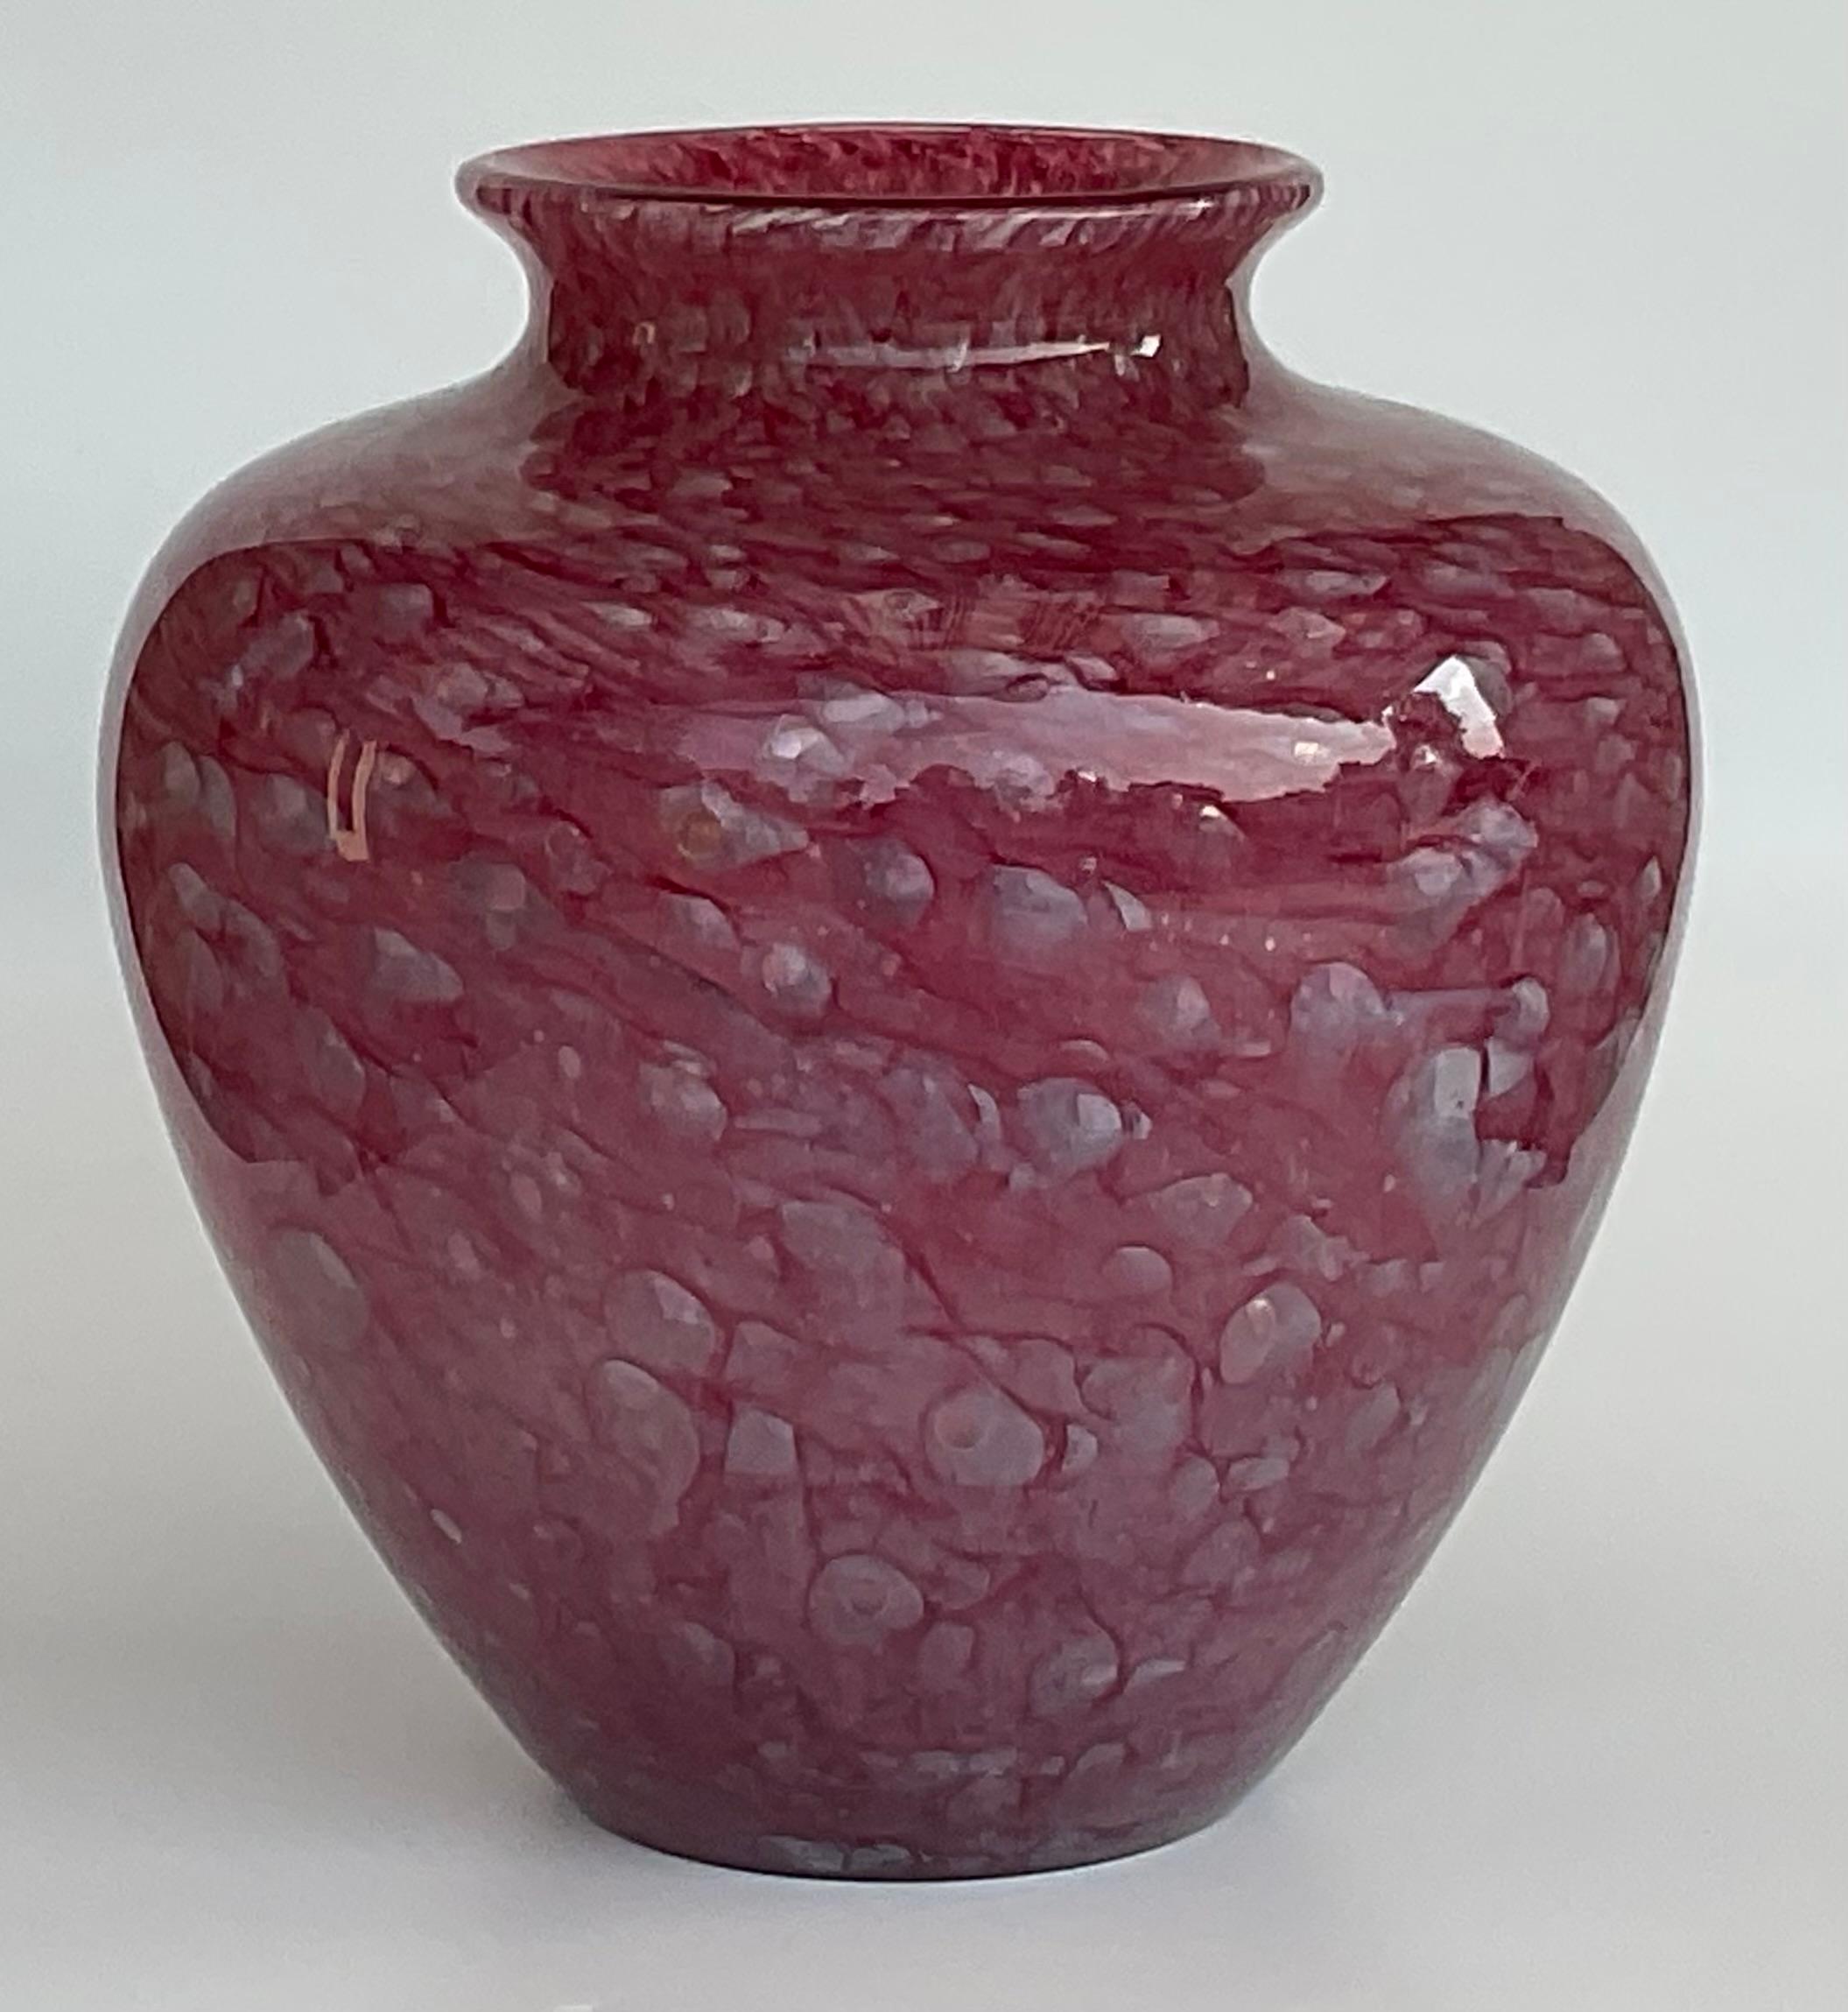 LARGE Steuben Art Glass Cluthra Vase Circa 1920 Signed in Script In vibrant pinkish red. This is a large example in this hard to find technique. 